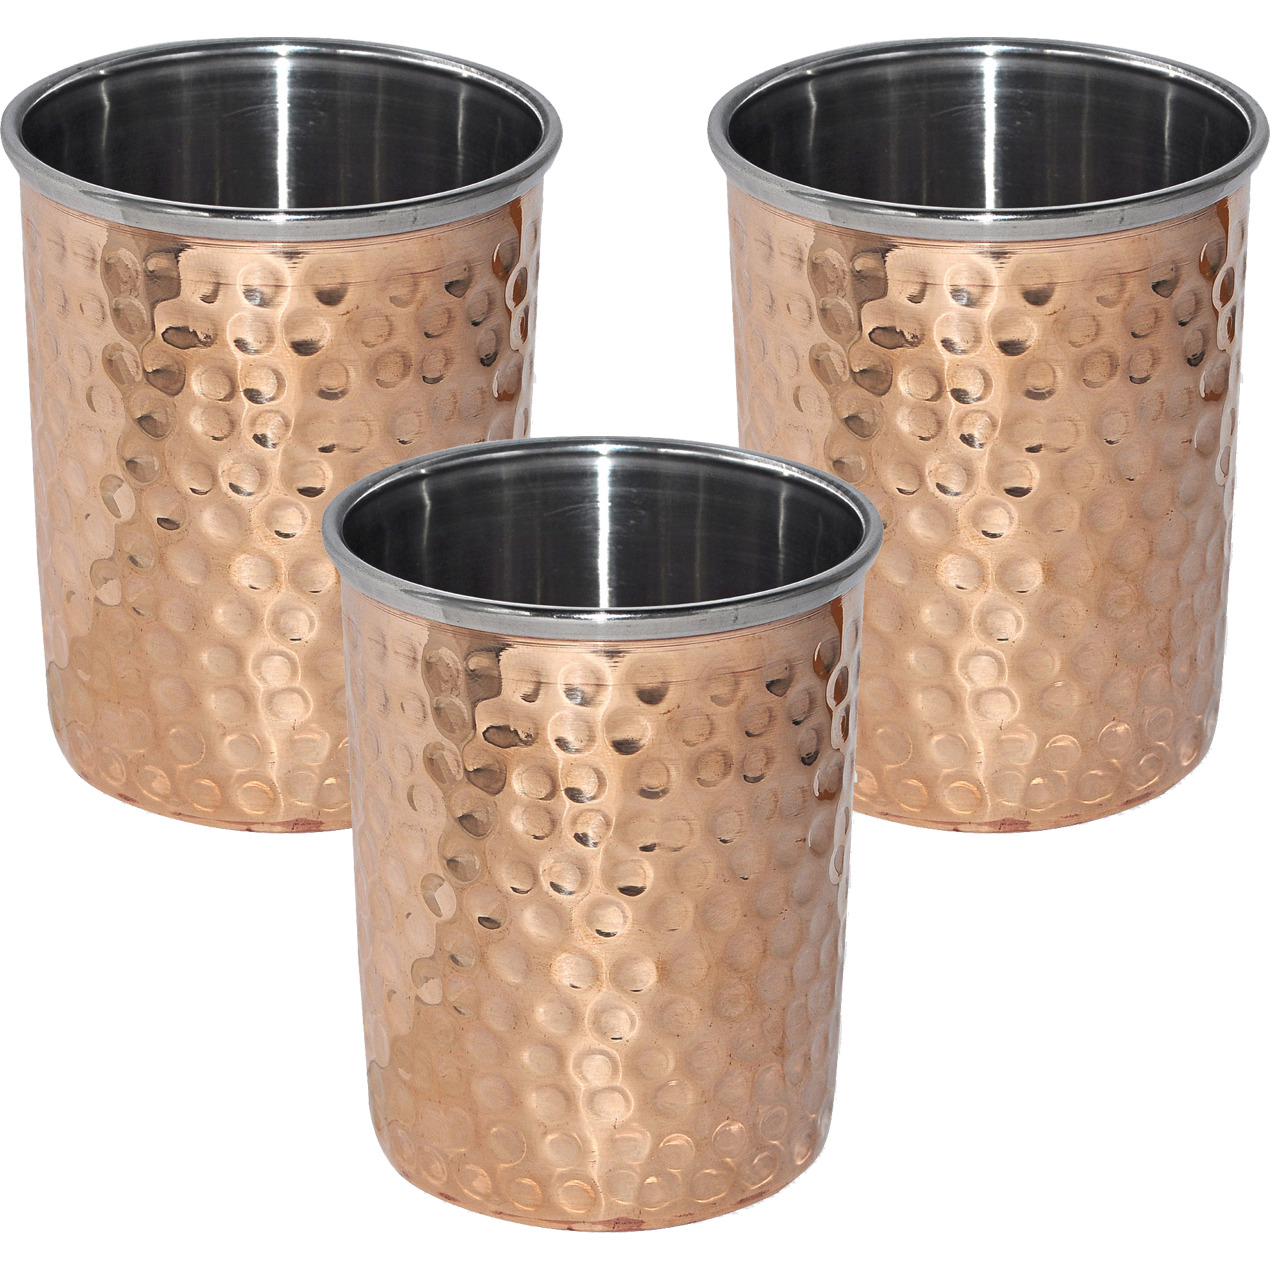 Set of 3 - Prisha India Craft B. Handmade Water Glass  Inside Stainless Steel Copper Tumbler | Traveller's Copper Cup